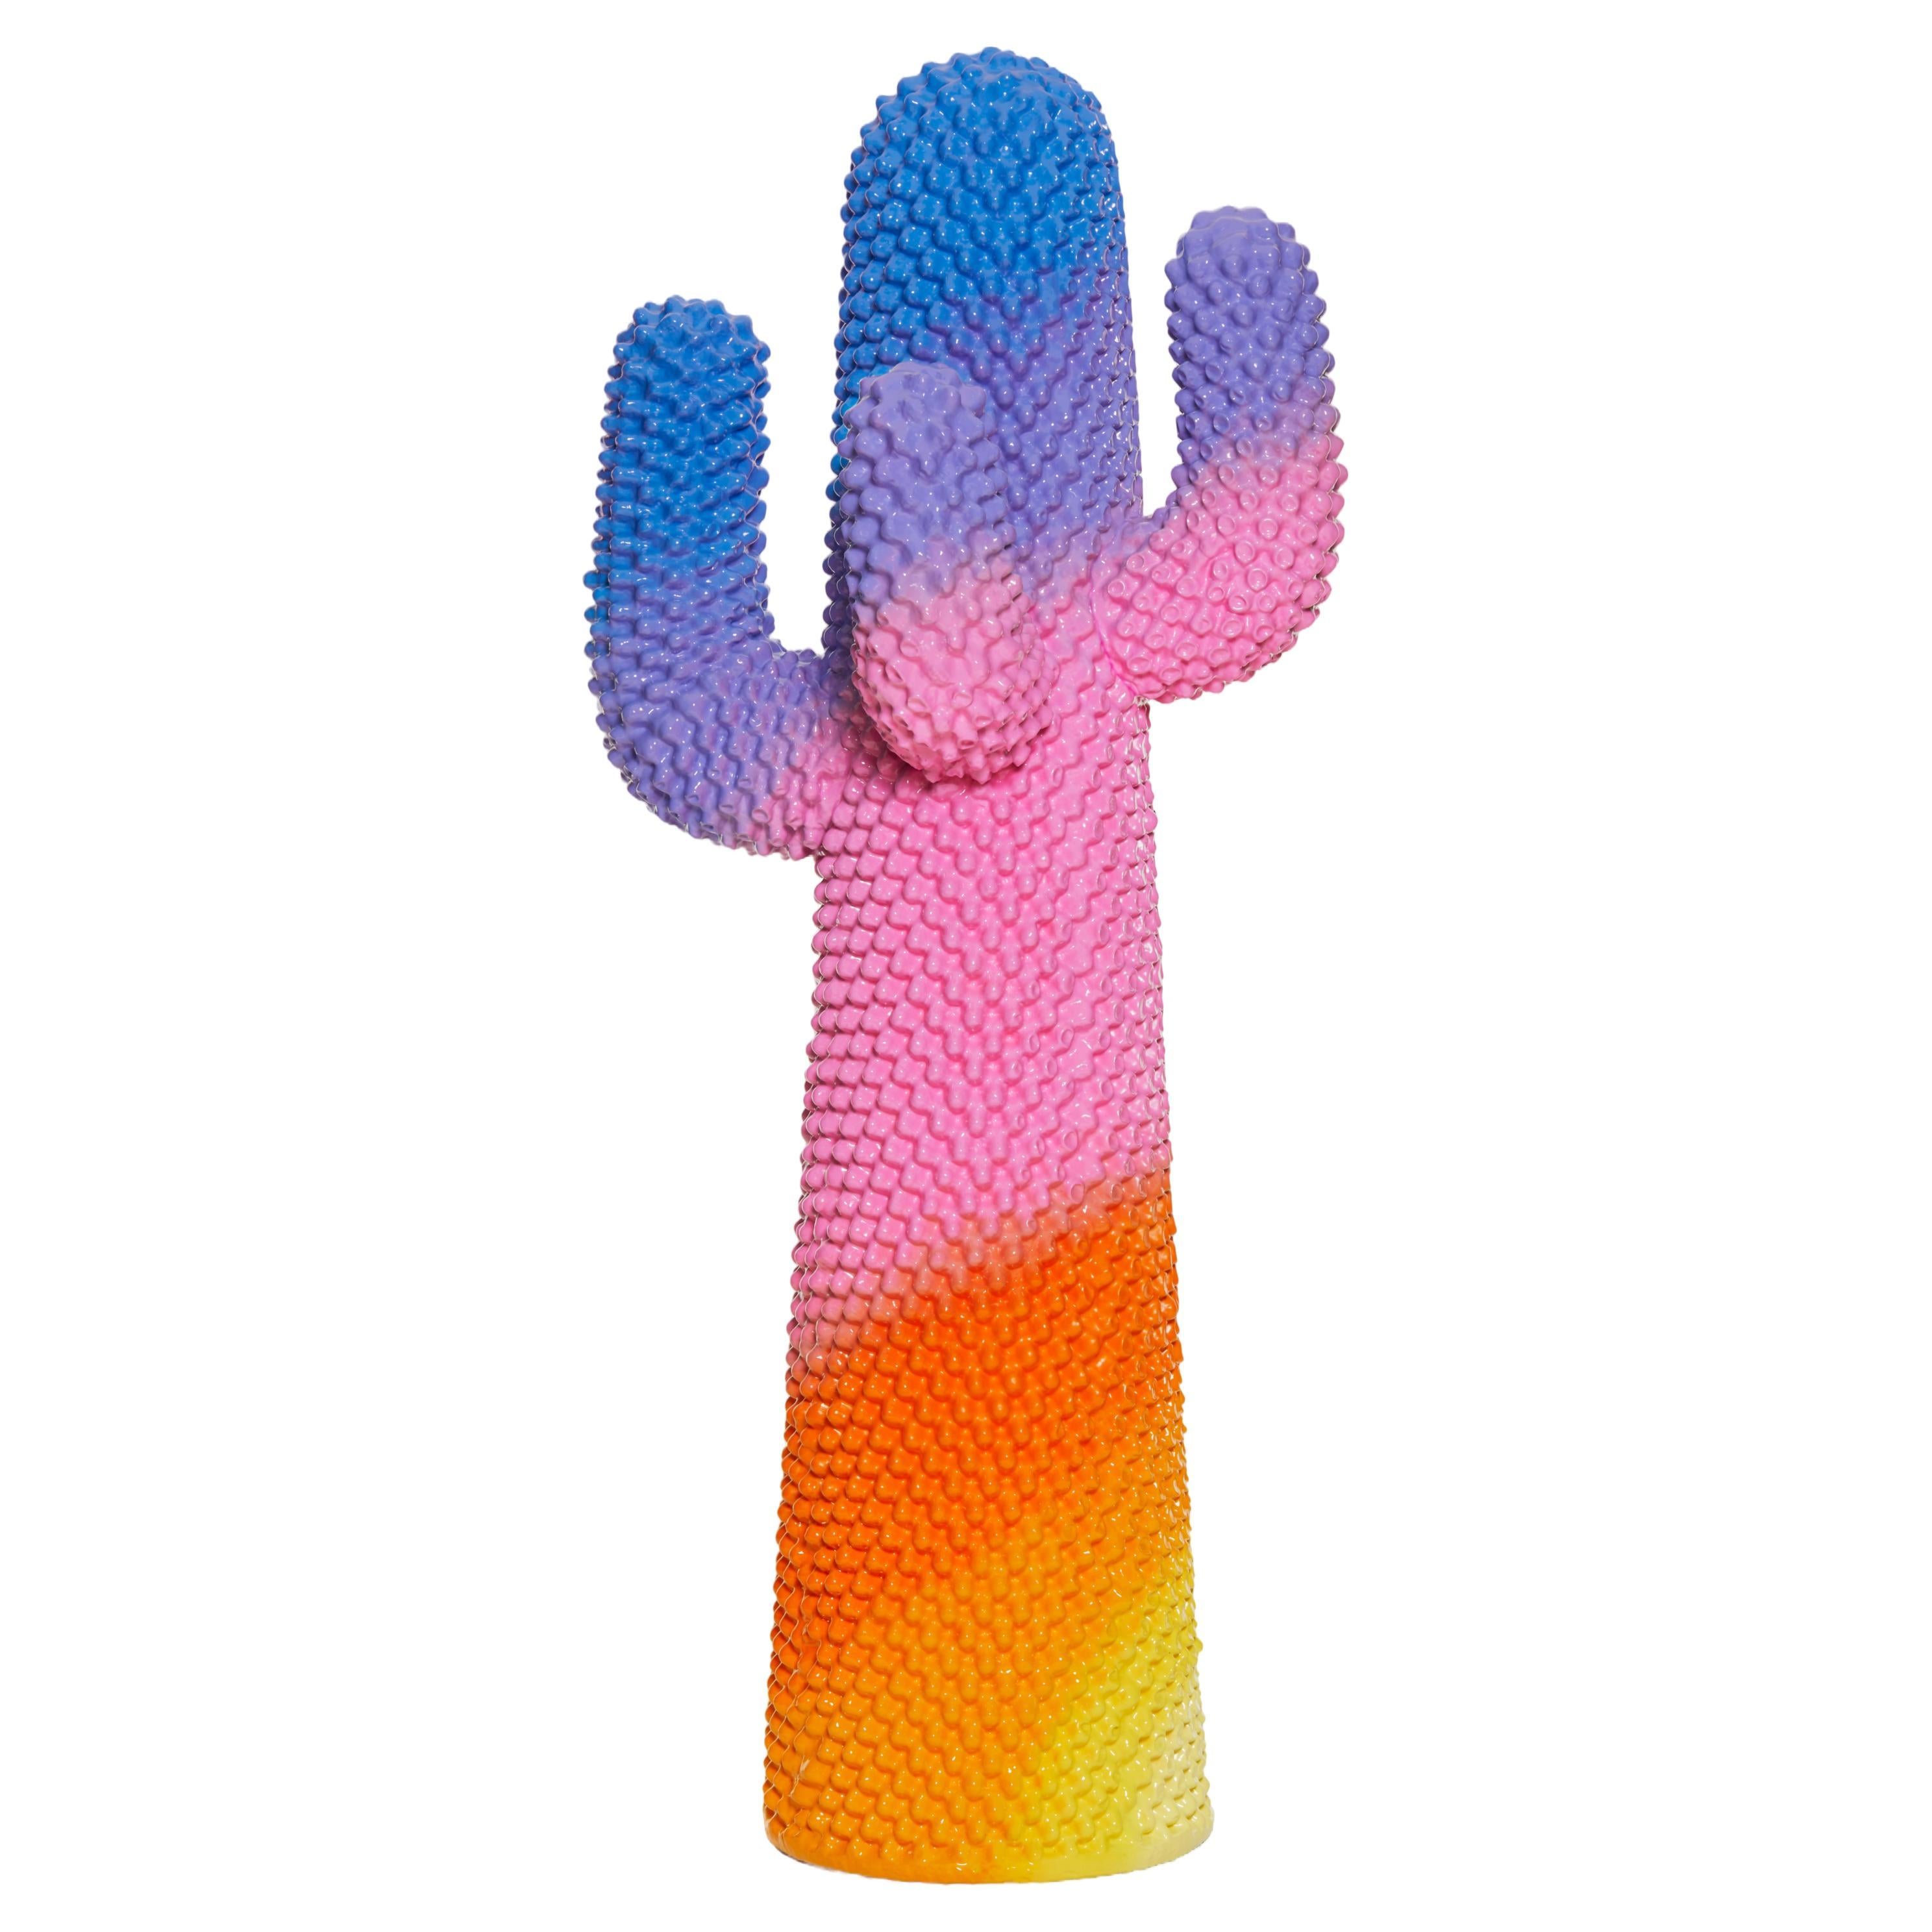 GUFRAM Sunrise Cactus by Drocco & Mello - Paul Smith limited edition 1/169 For Sale